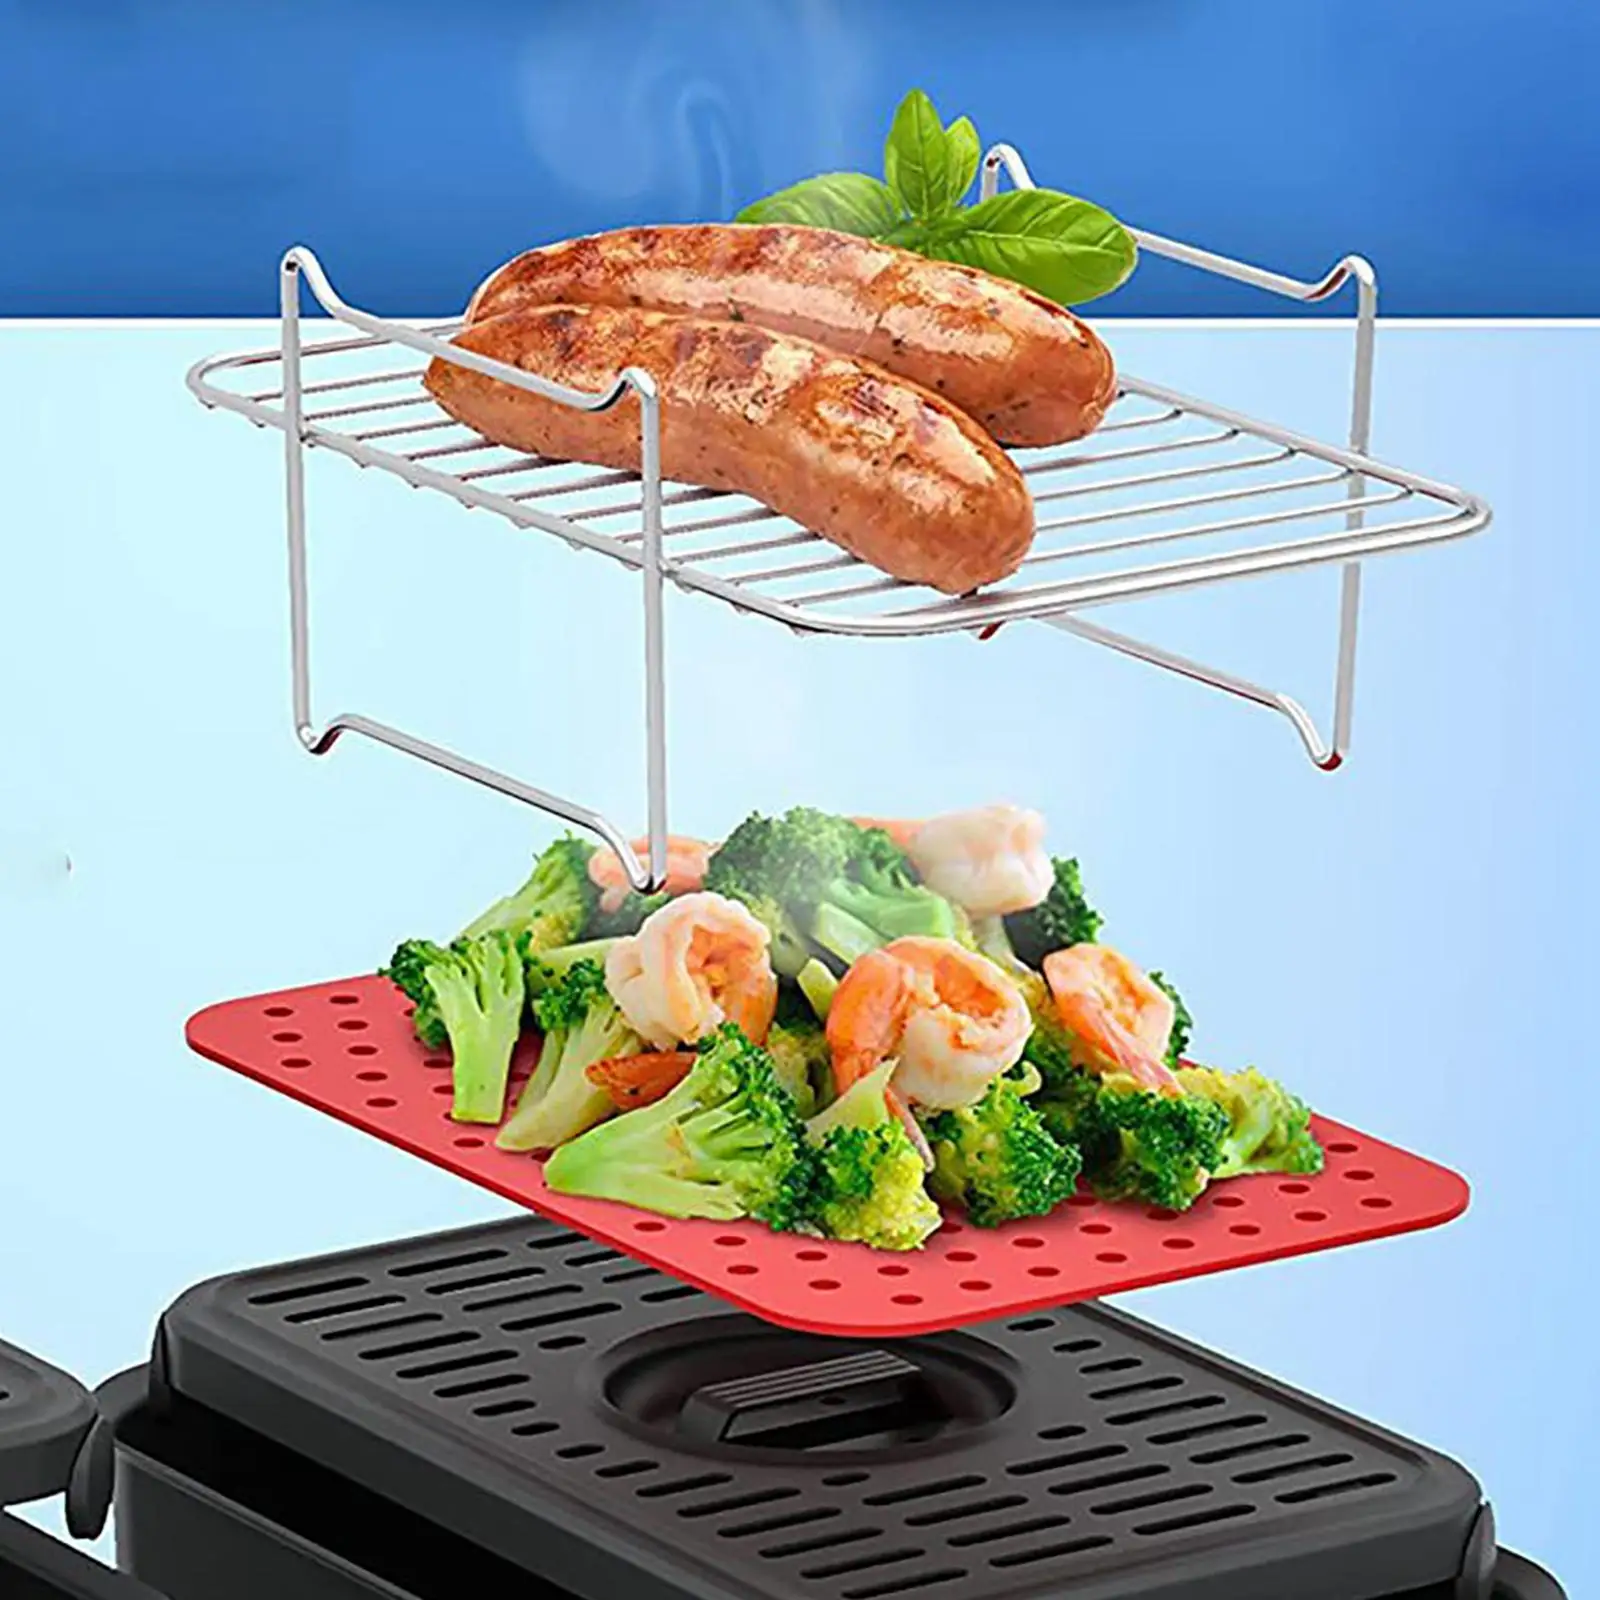 Stainless Steel Dehydrator Rack Easy Clean Support Stand Toast Rack Grill Rack Kitchen Supplies